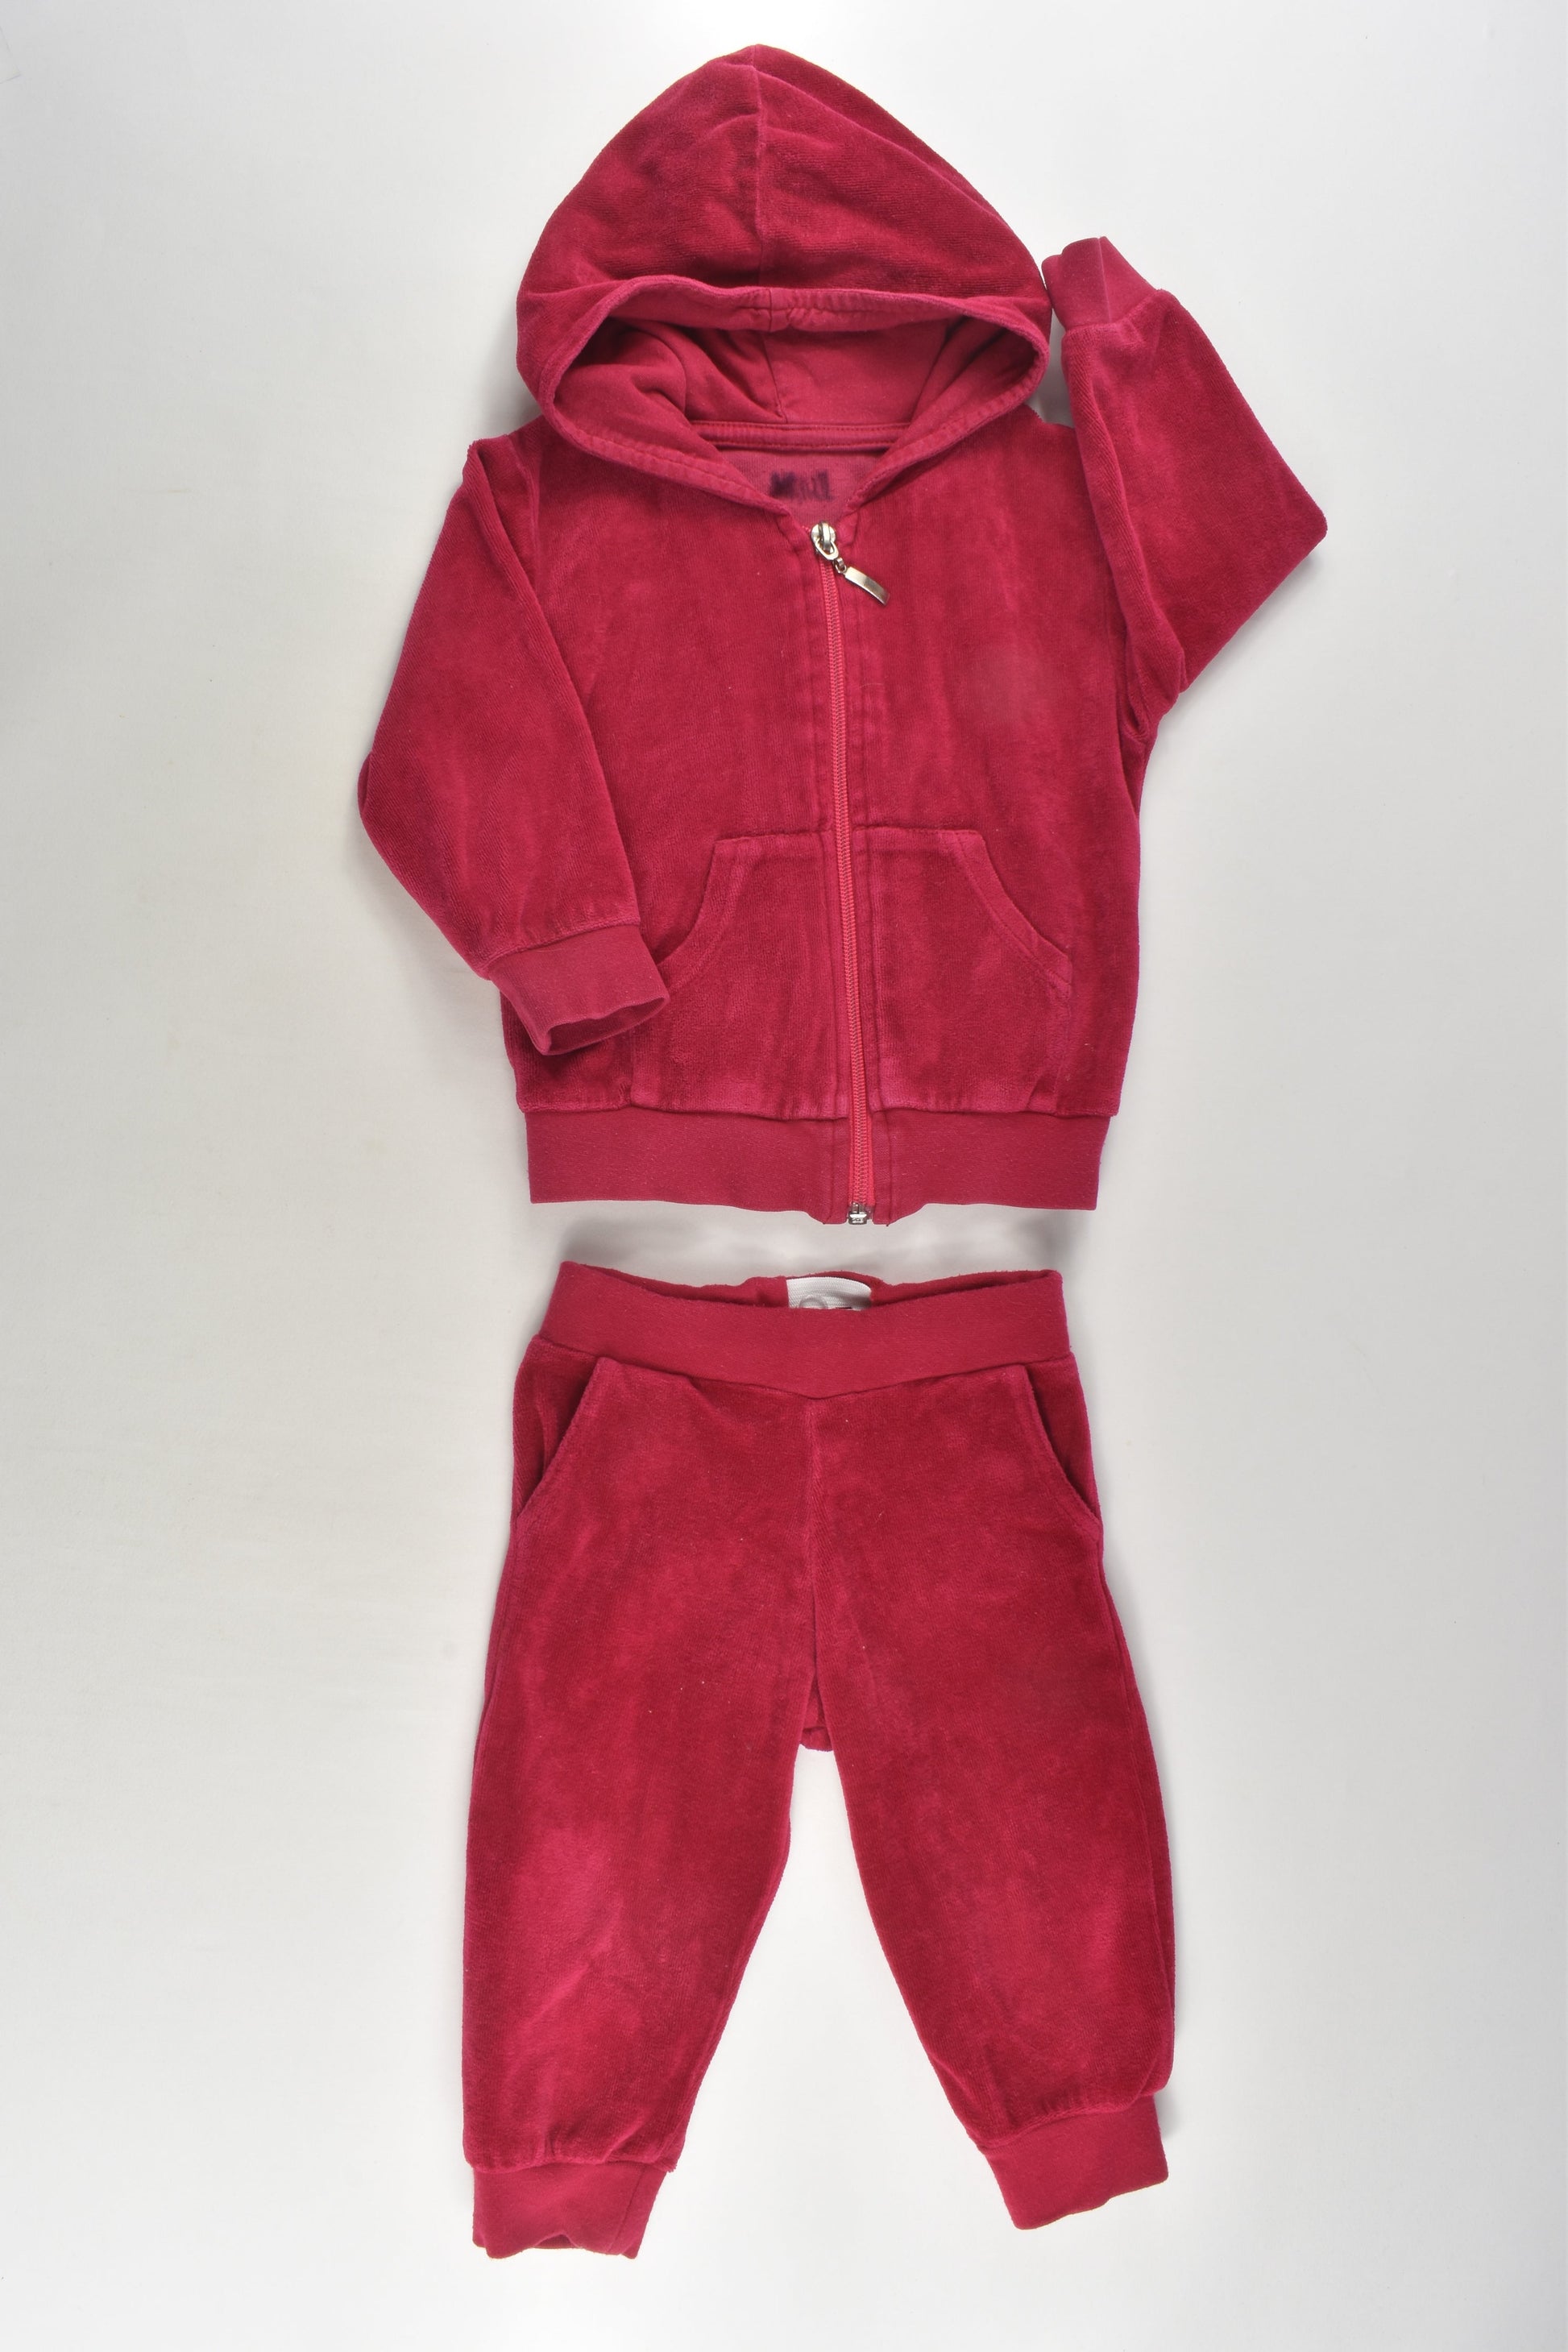 Finnwear Size 00 (68 cm) Velour Outfit